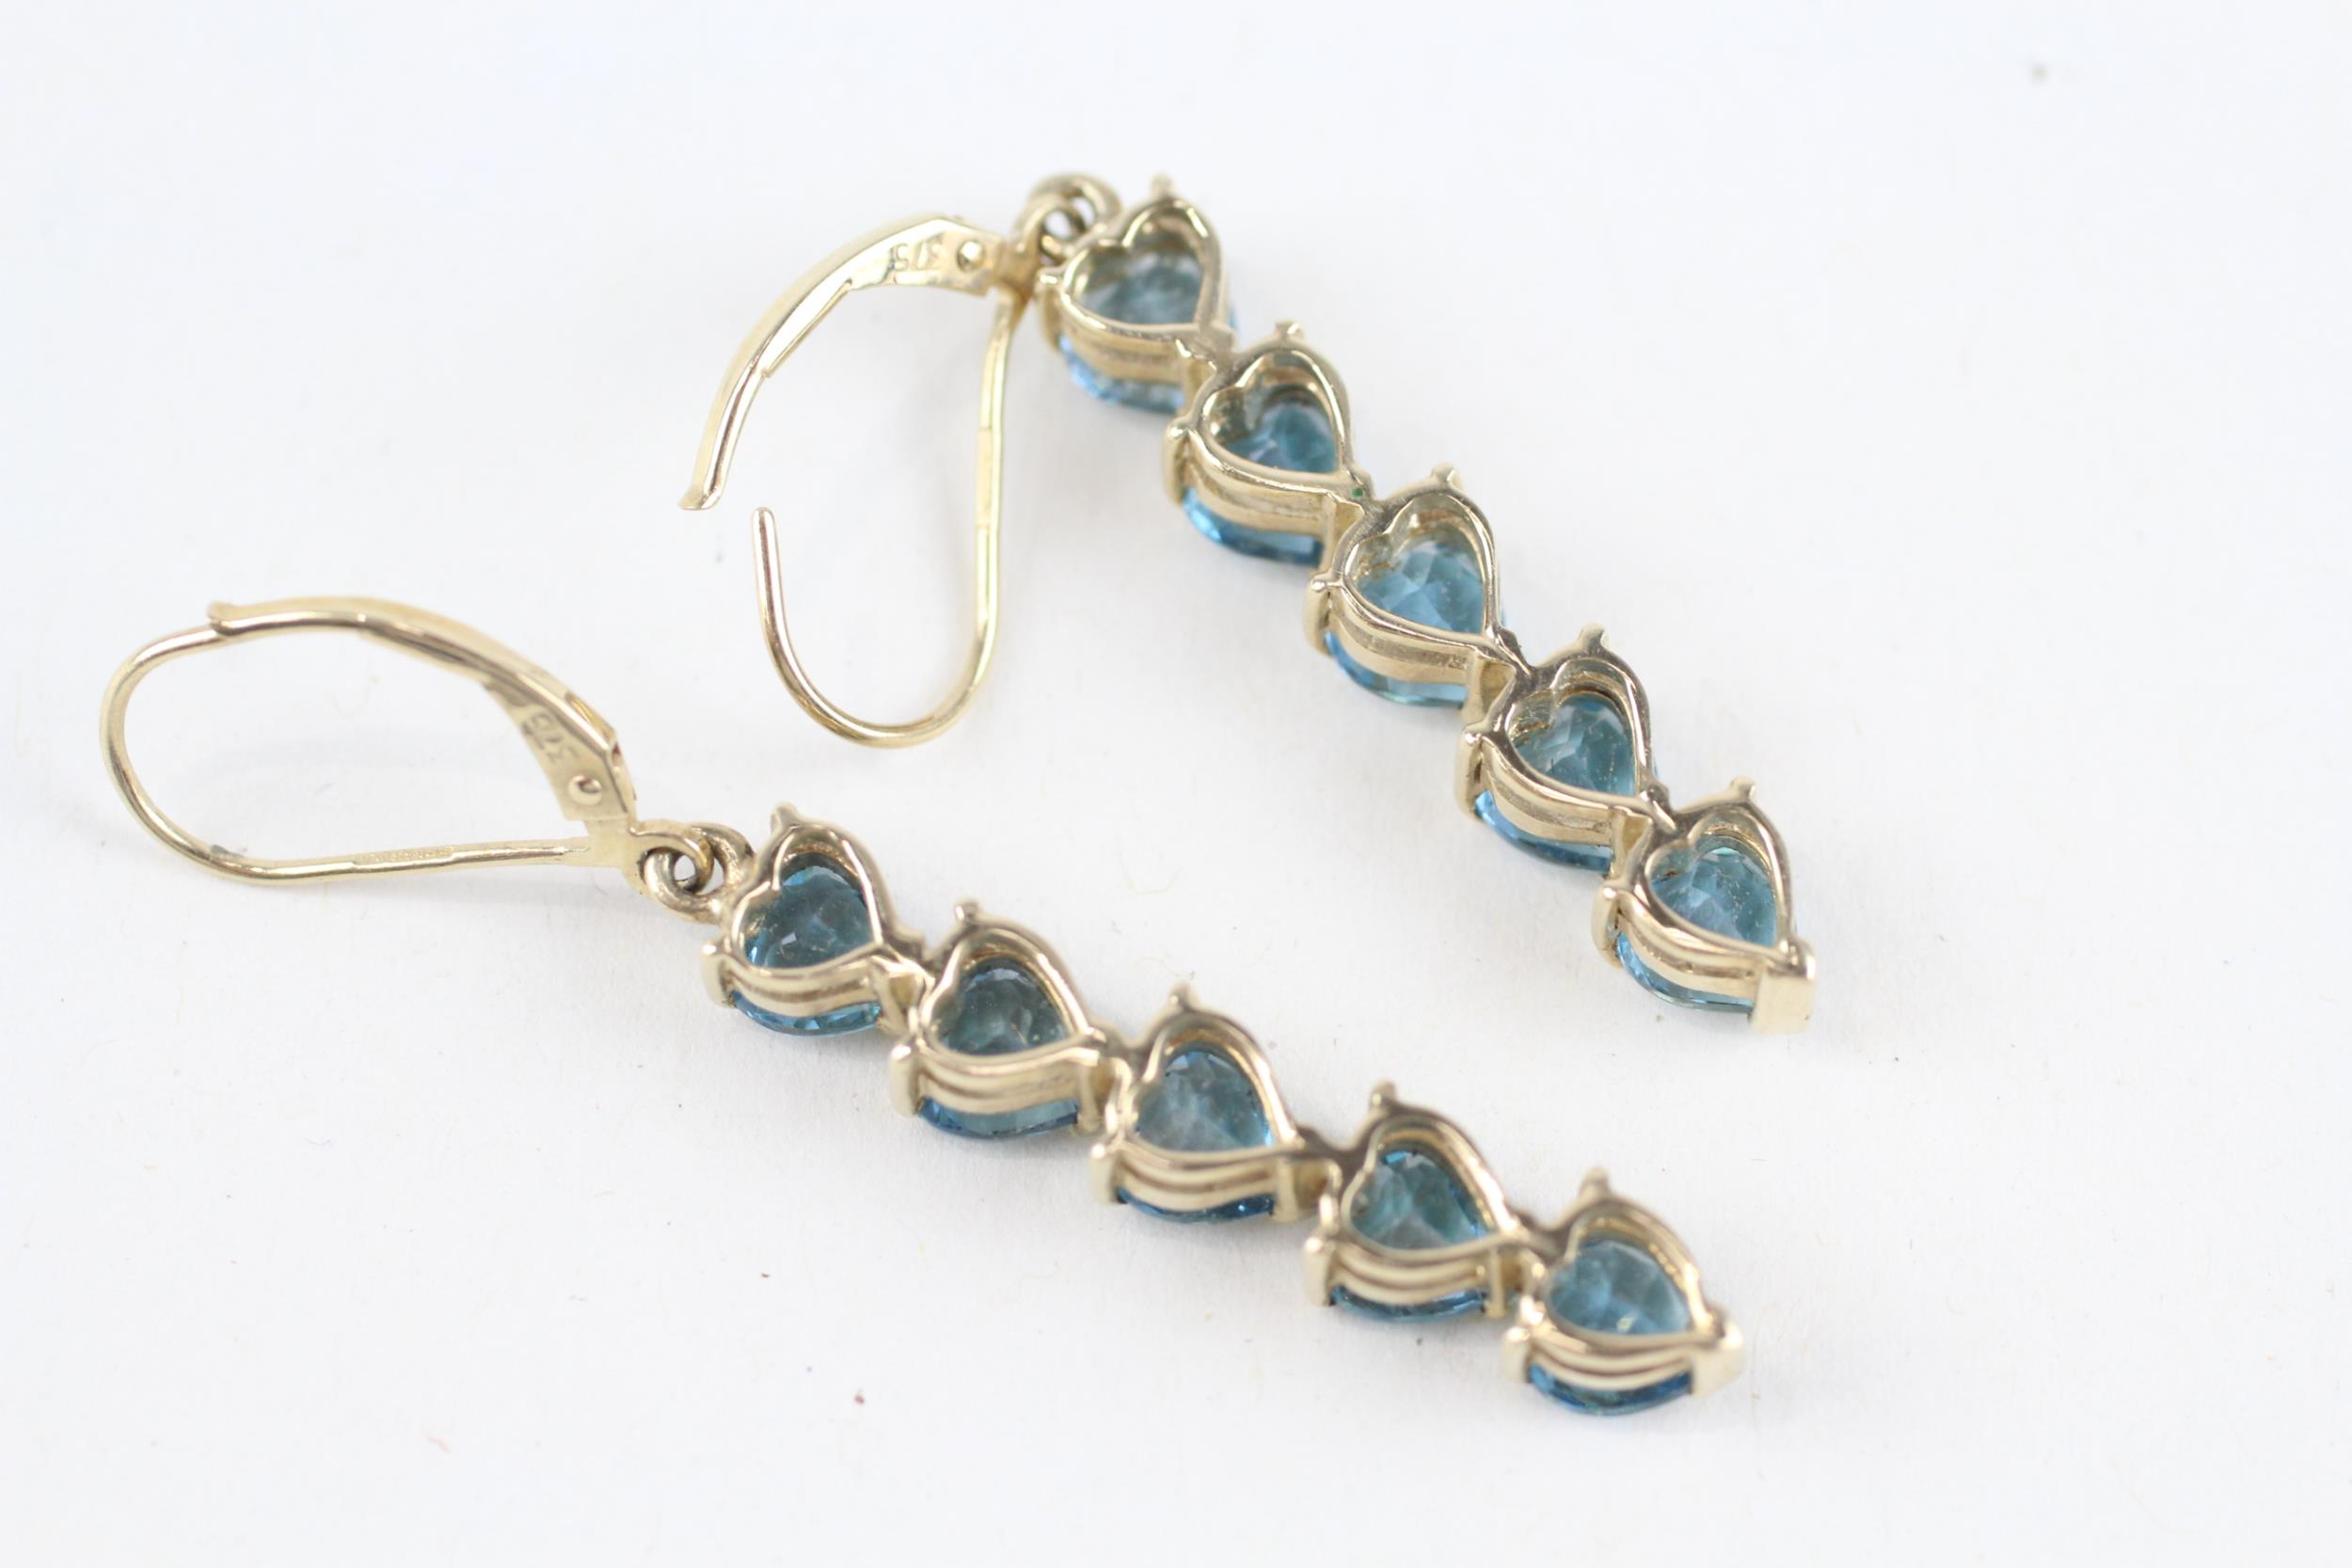 9ct gold heart shaped cut blue topaz drop earrings with lever backs - 5.1 g - Image 4 of 4